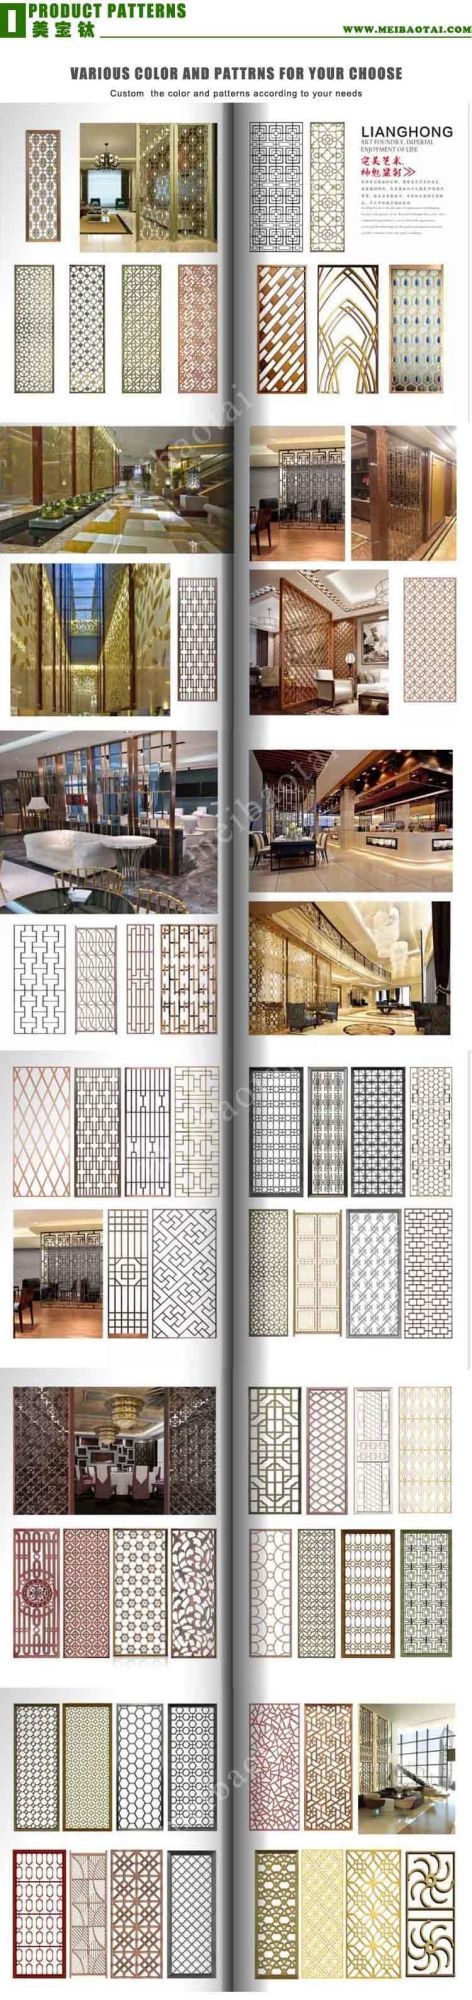 Great Value Stainless Steel Hotel Decorative Screen Divider Colored Decorative Stainless Steel Divider